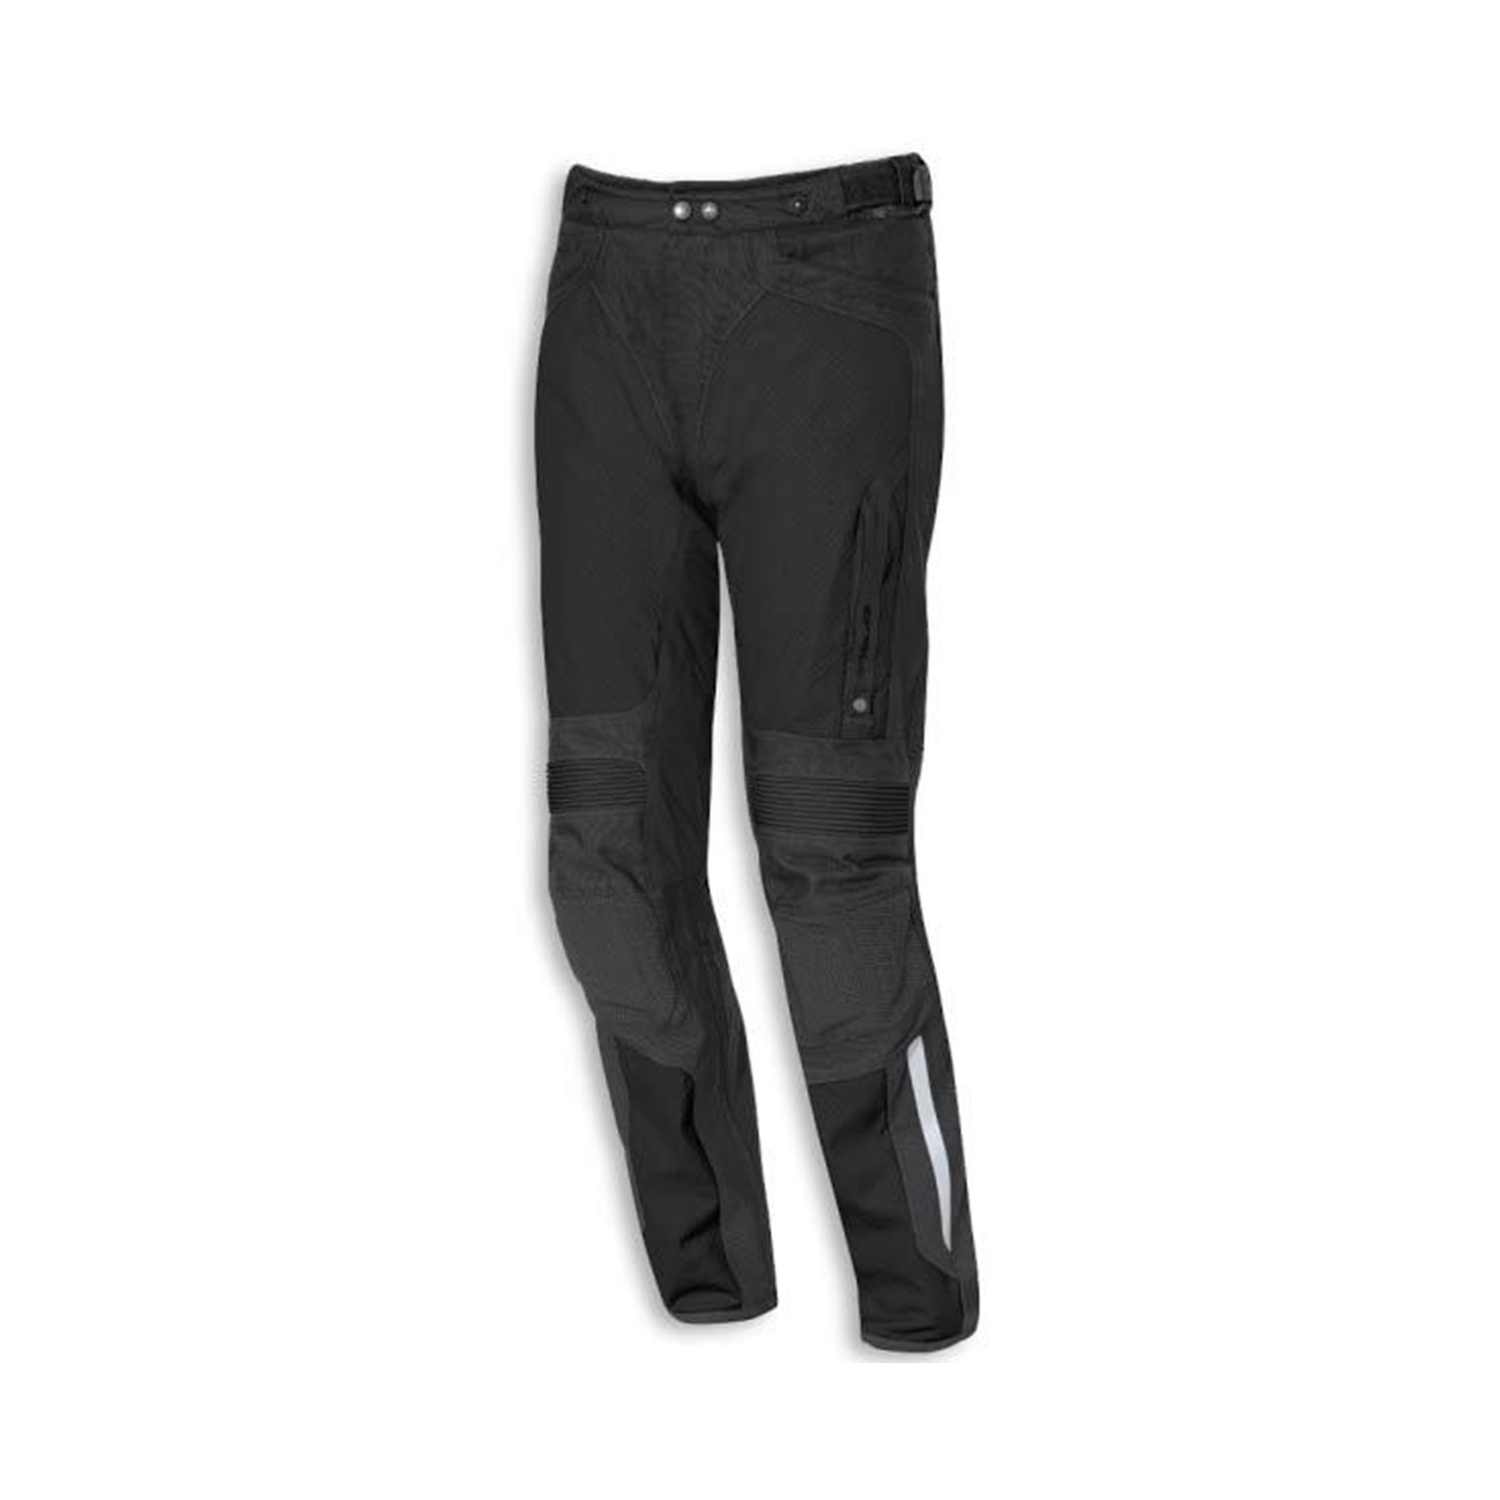 Held Pezzo Pants - Available in Various Sizes